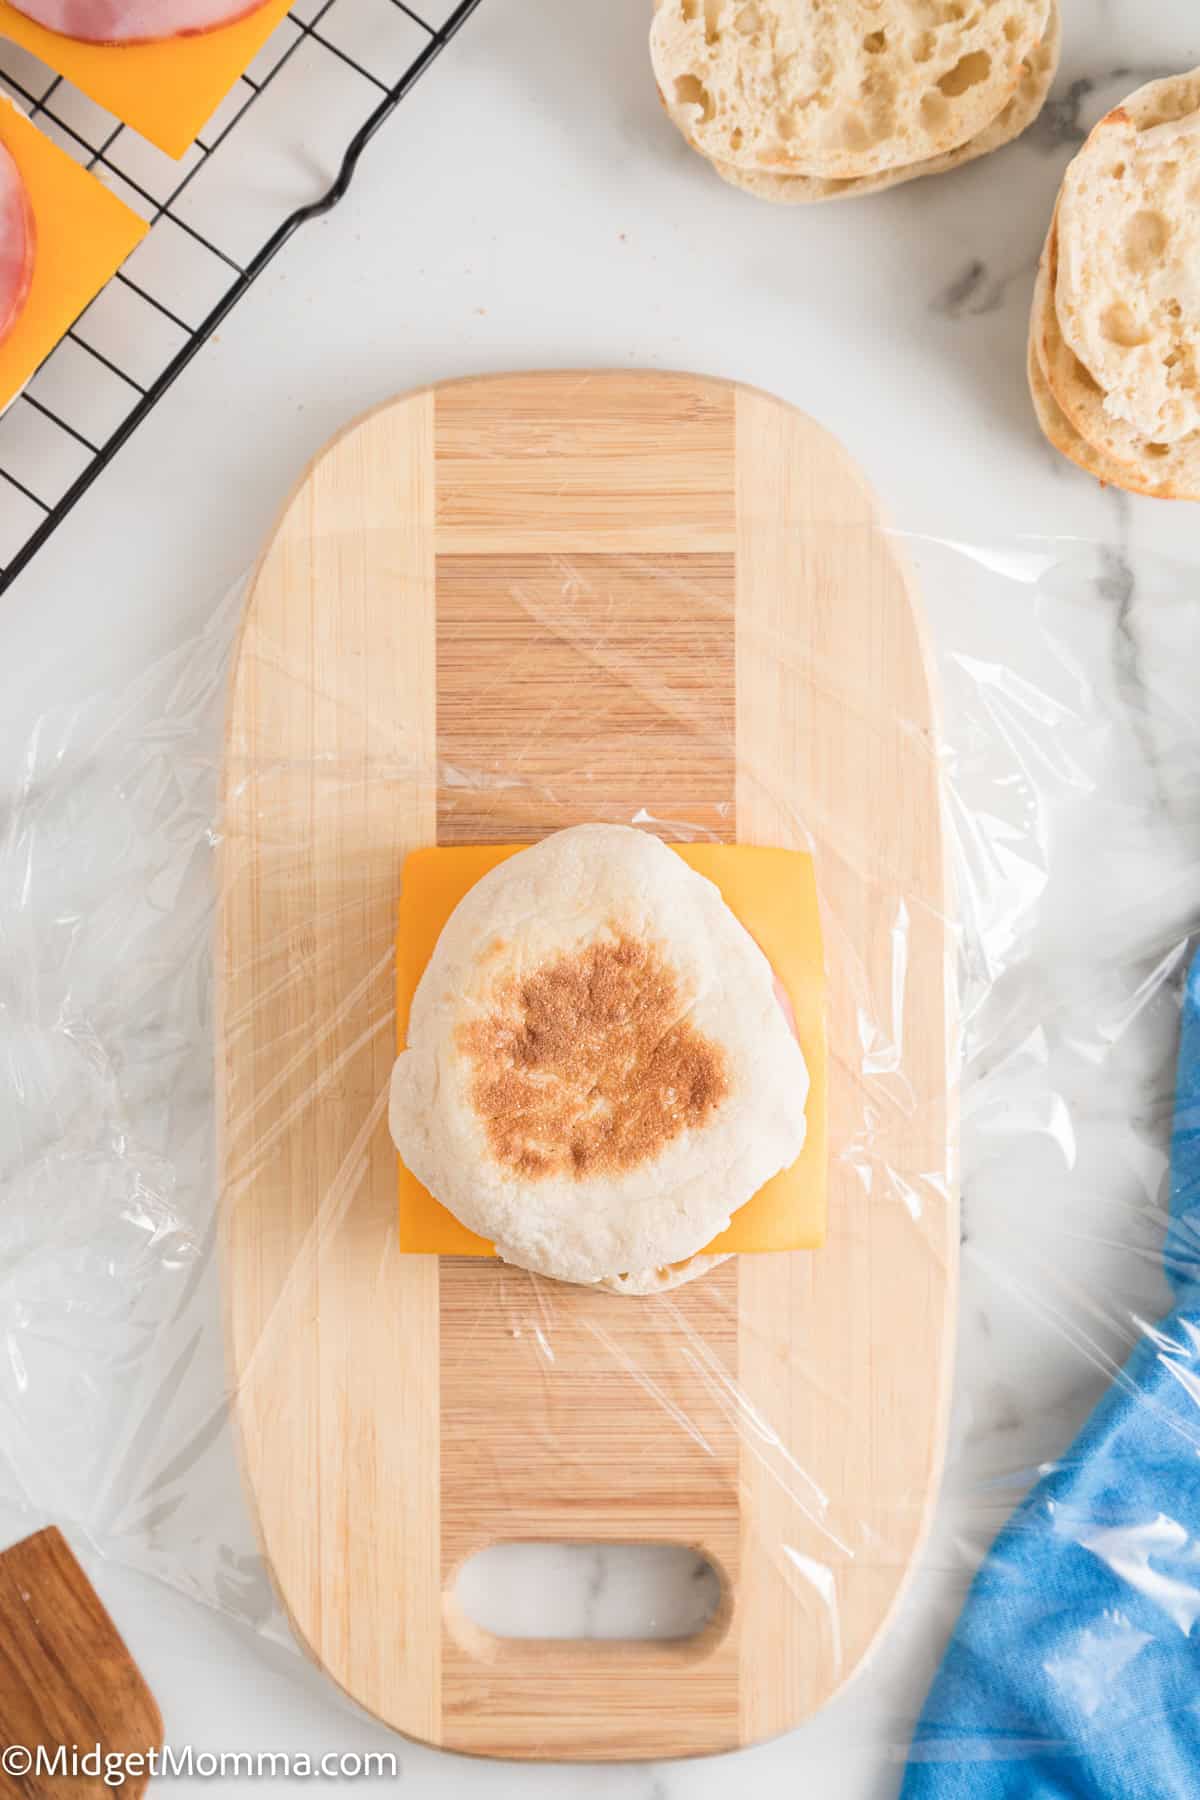 An English muffin half with a slice of cheese sits on a wooden cutting board covered with plastic wrap. Other food items and kitchen utensils are partially visible on a marble countertop.